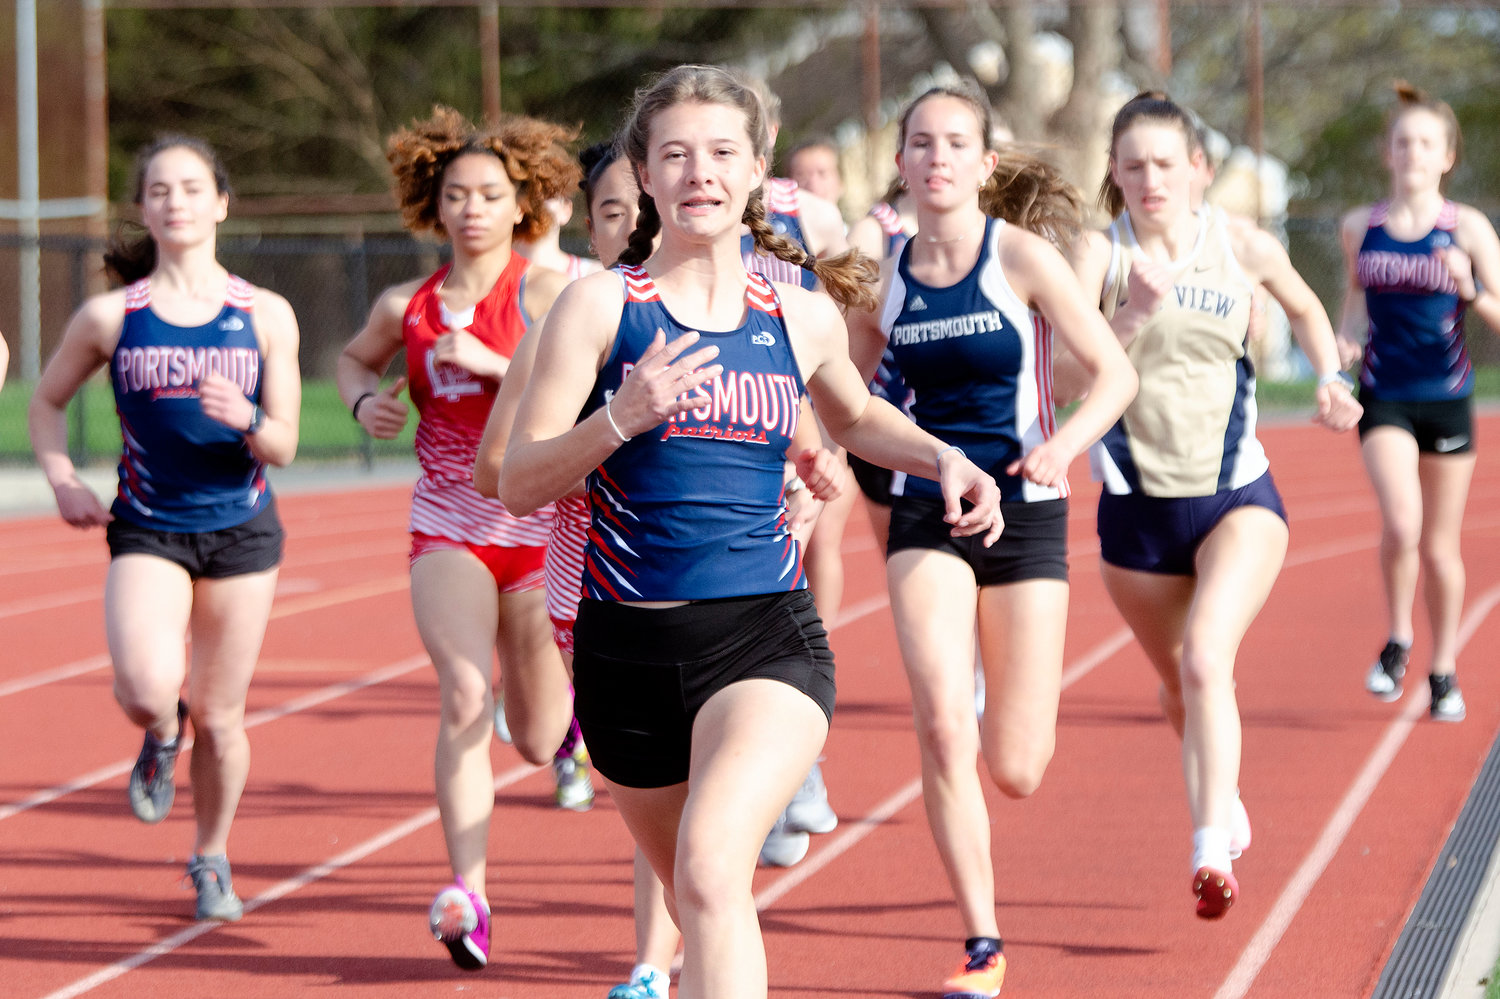 Portsmouth’s Addison Mau leads the pack during the start of the 1,500-meter run, which she’d go on to win in a time of 5:12.8.